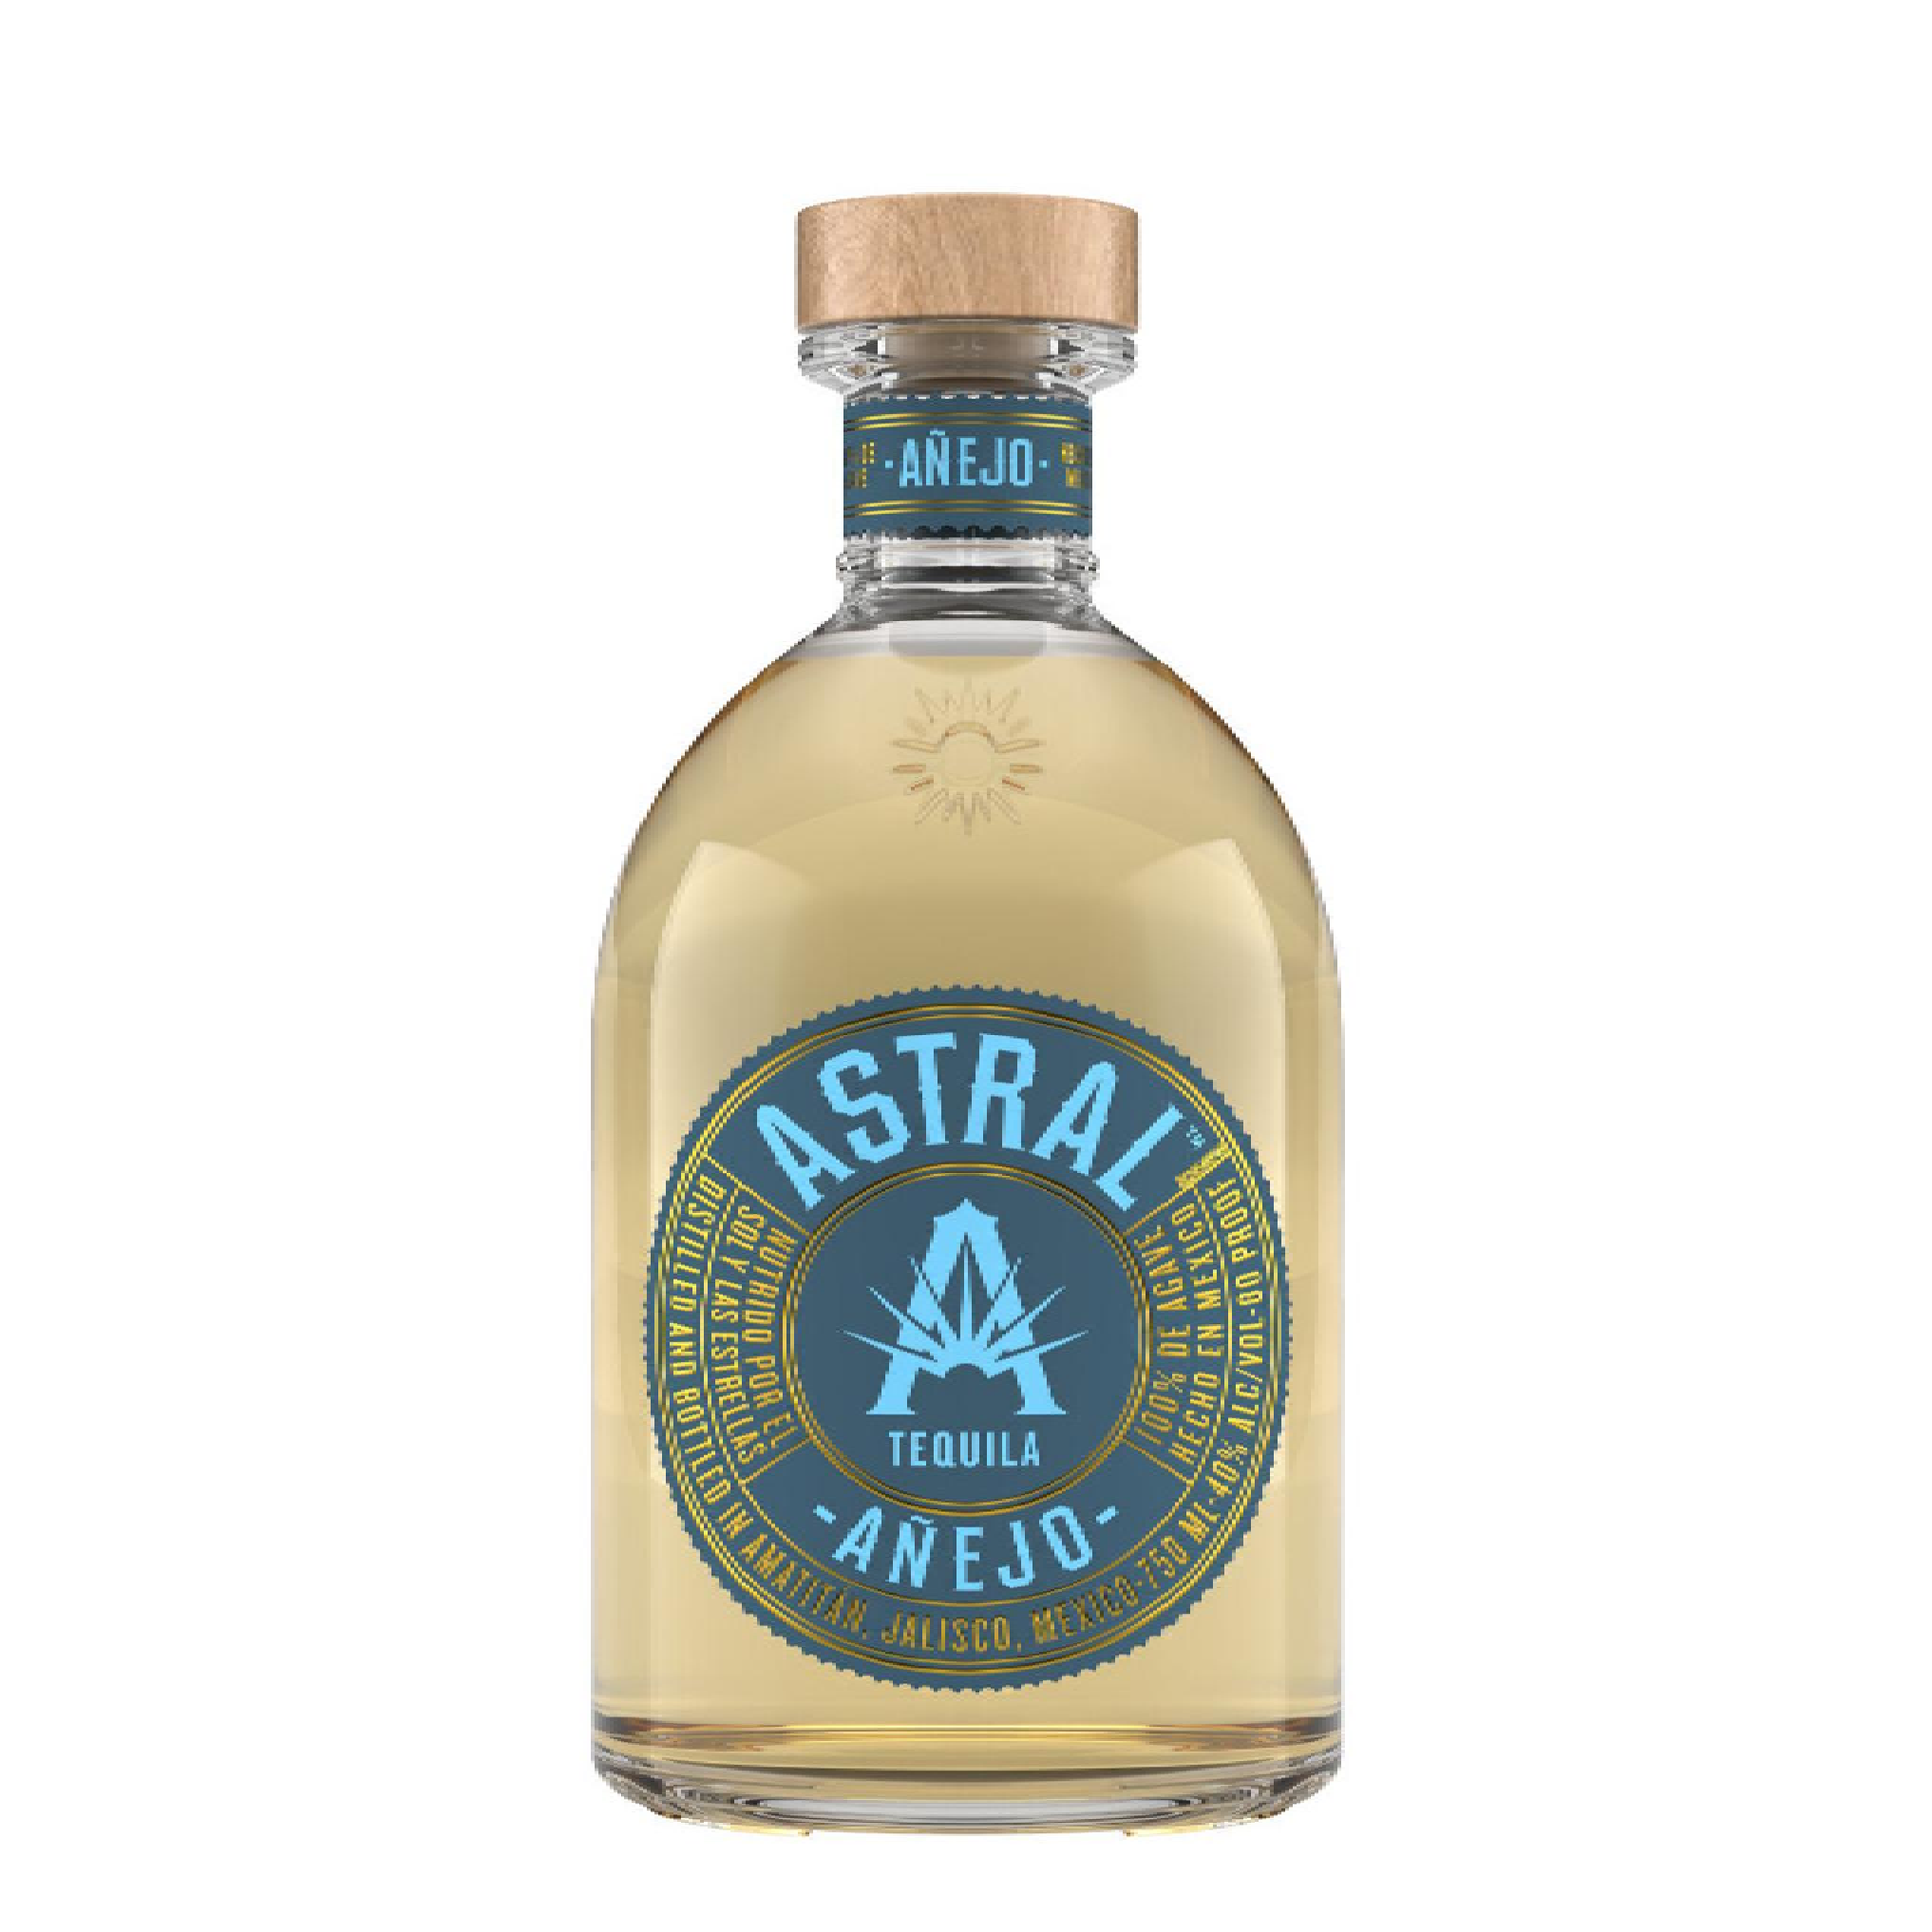 Astral Tequila Anejo - Liquor Geeks